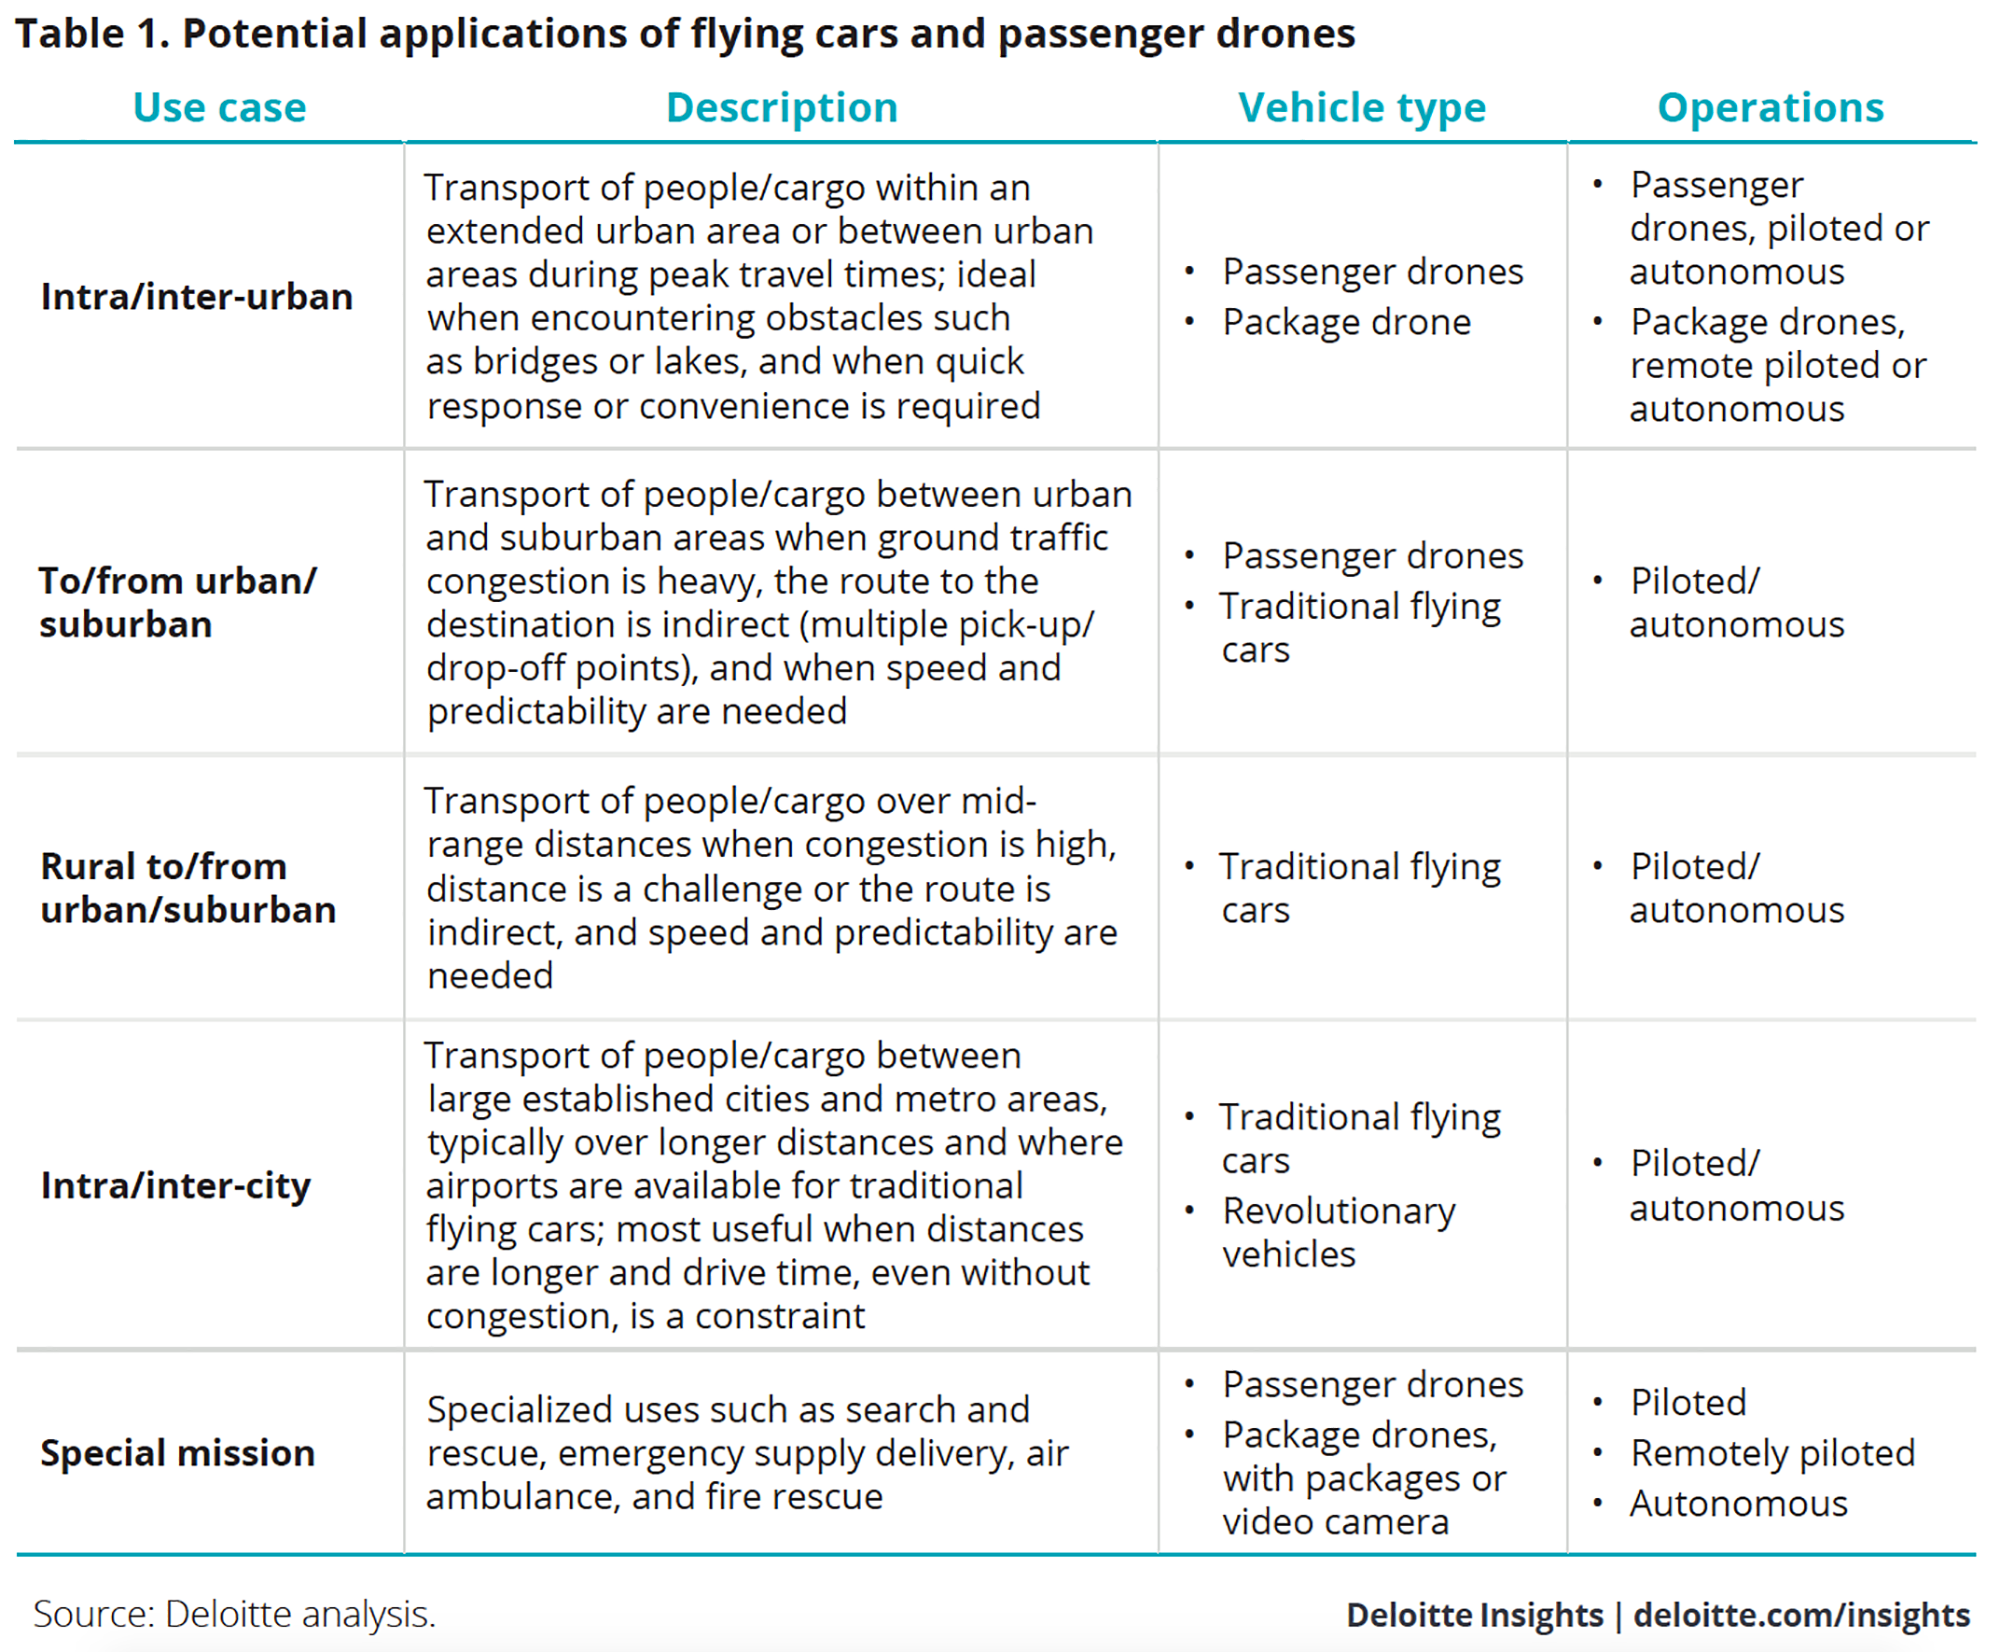 Potential applications of flying cars and passenger drones